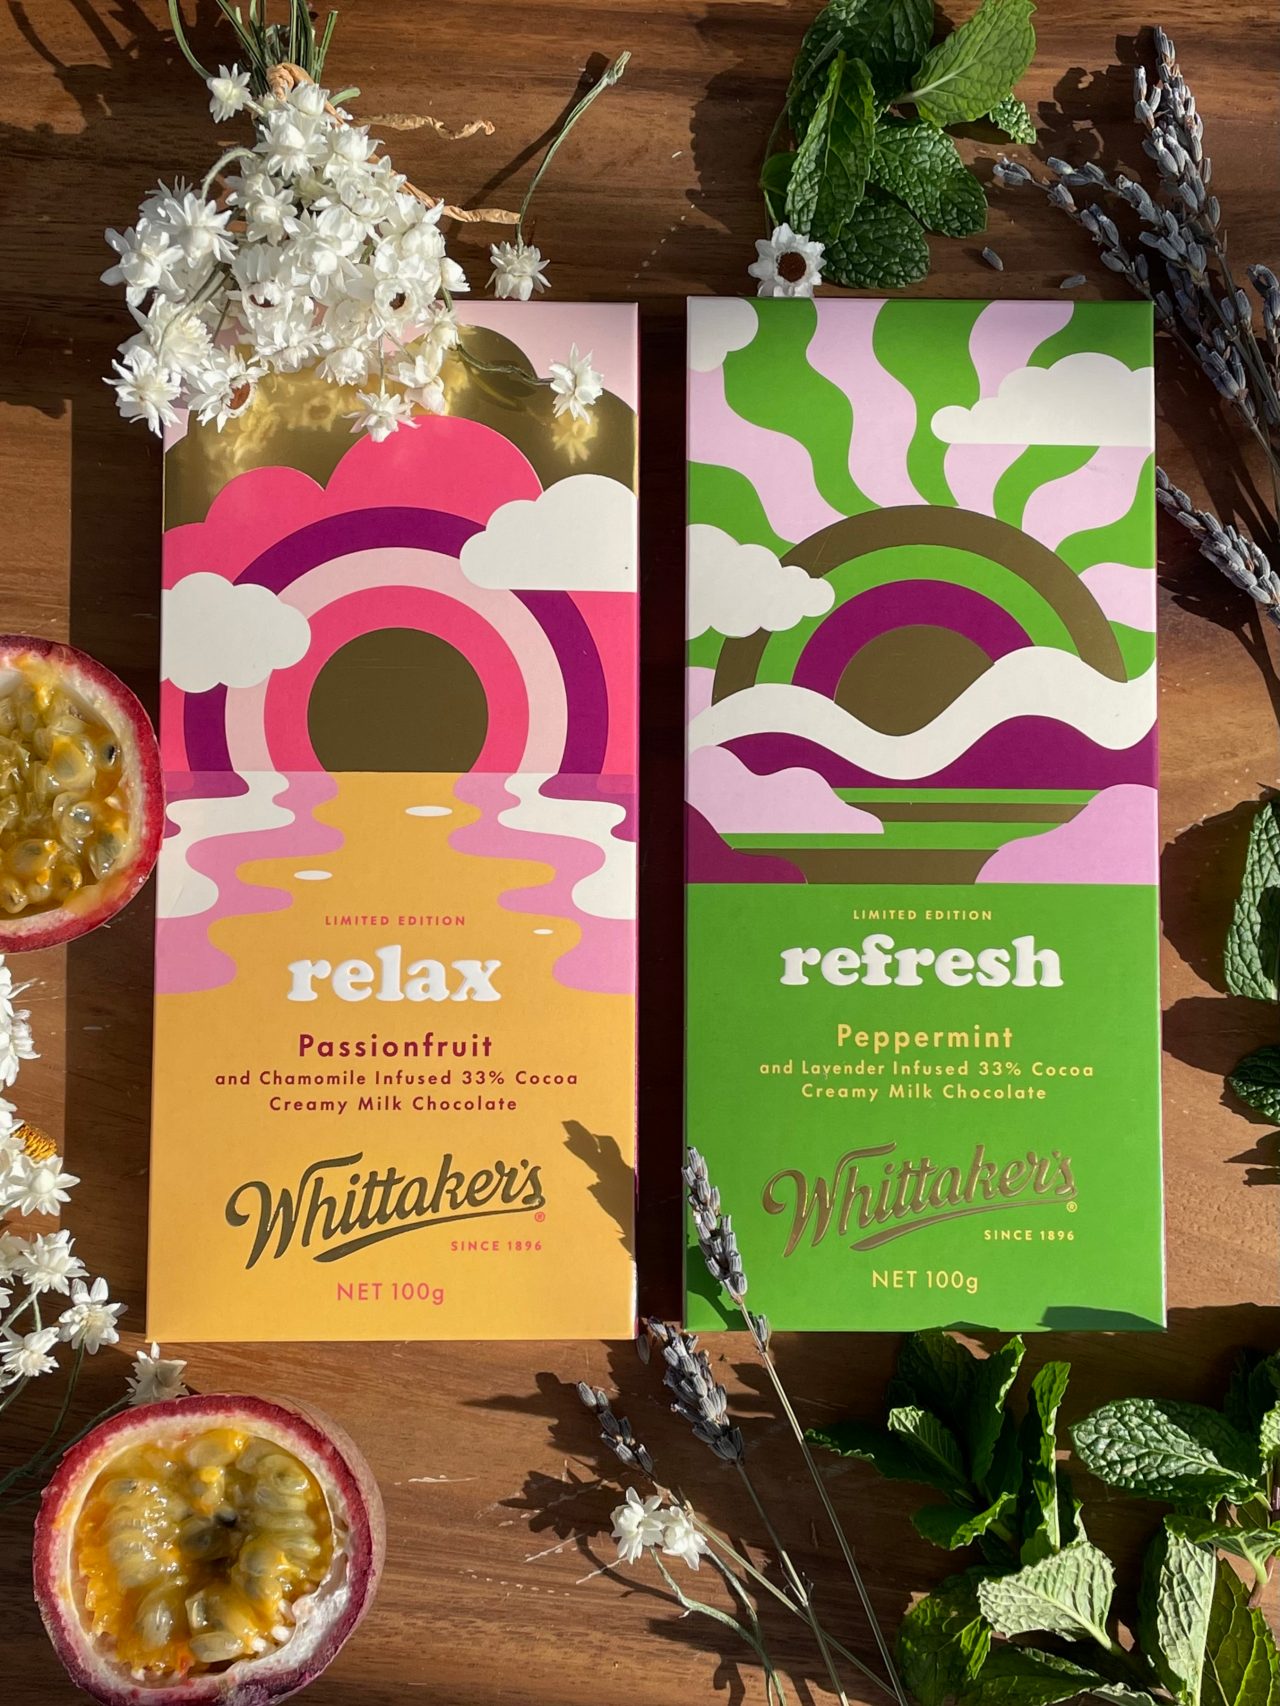 Whittakers announces new ‘Relax’ and ‘Refresh’ flavours